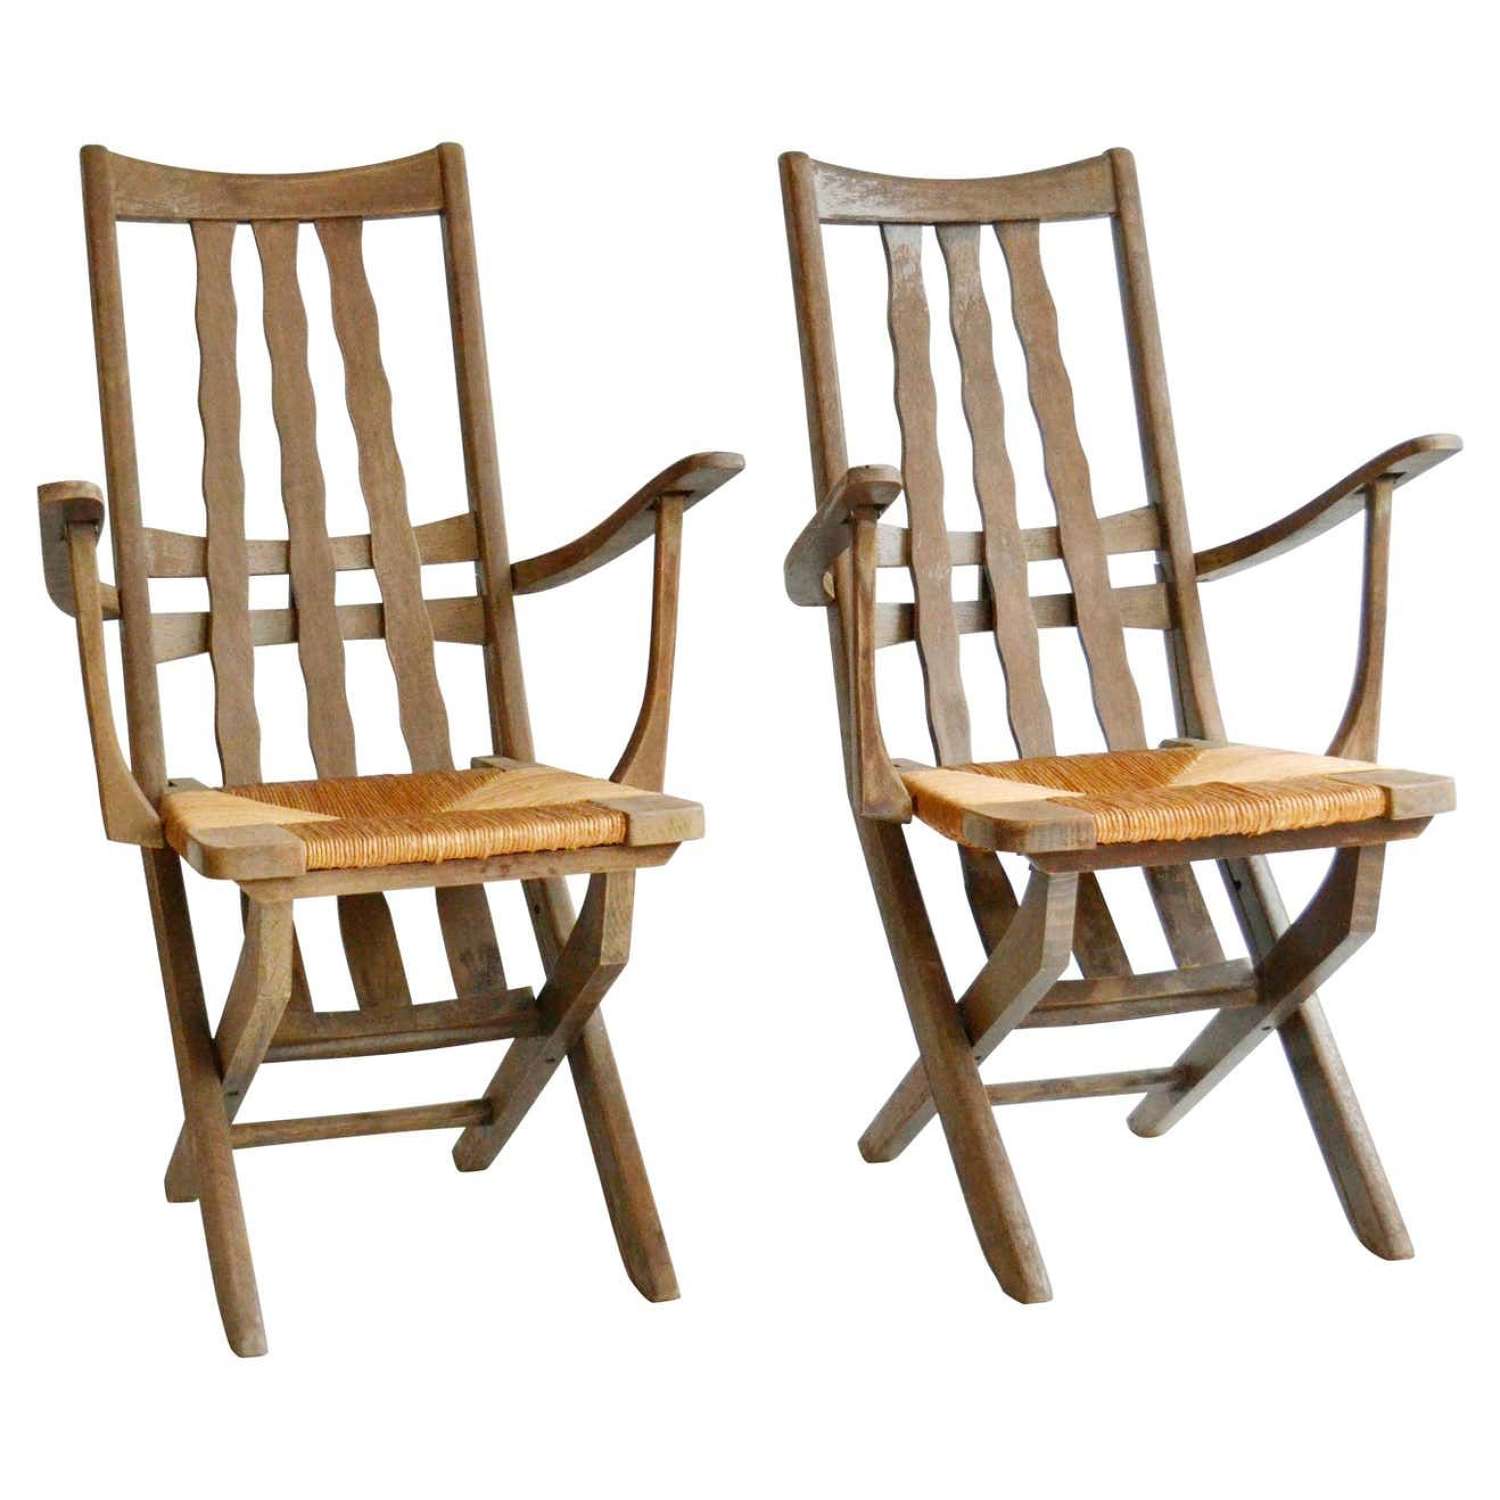 Pair of French Modernist Garden Oak Chairs, French, 1950's